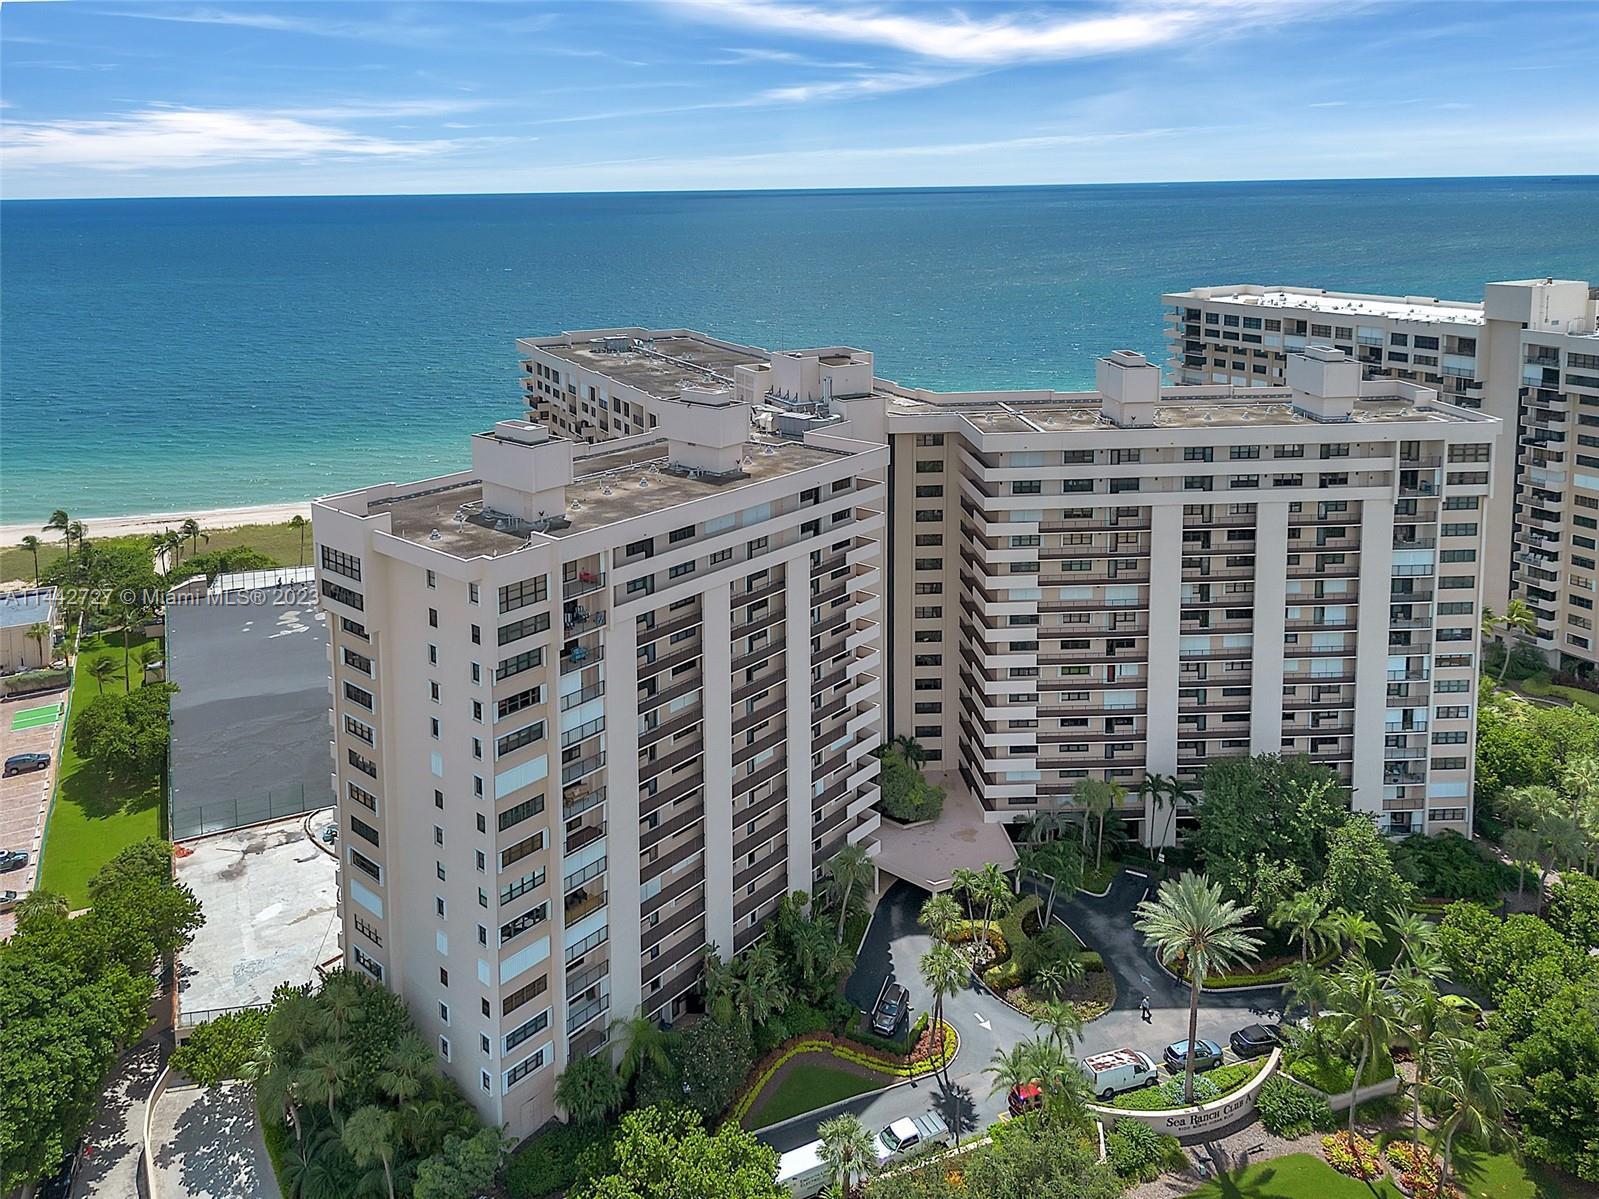 Don't miss out on the opportunity to own this large, corner 2 bed/2 bath beachfront condo!  With uno